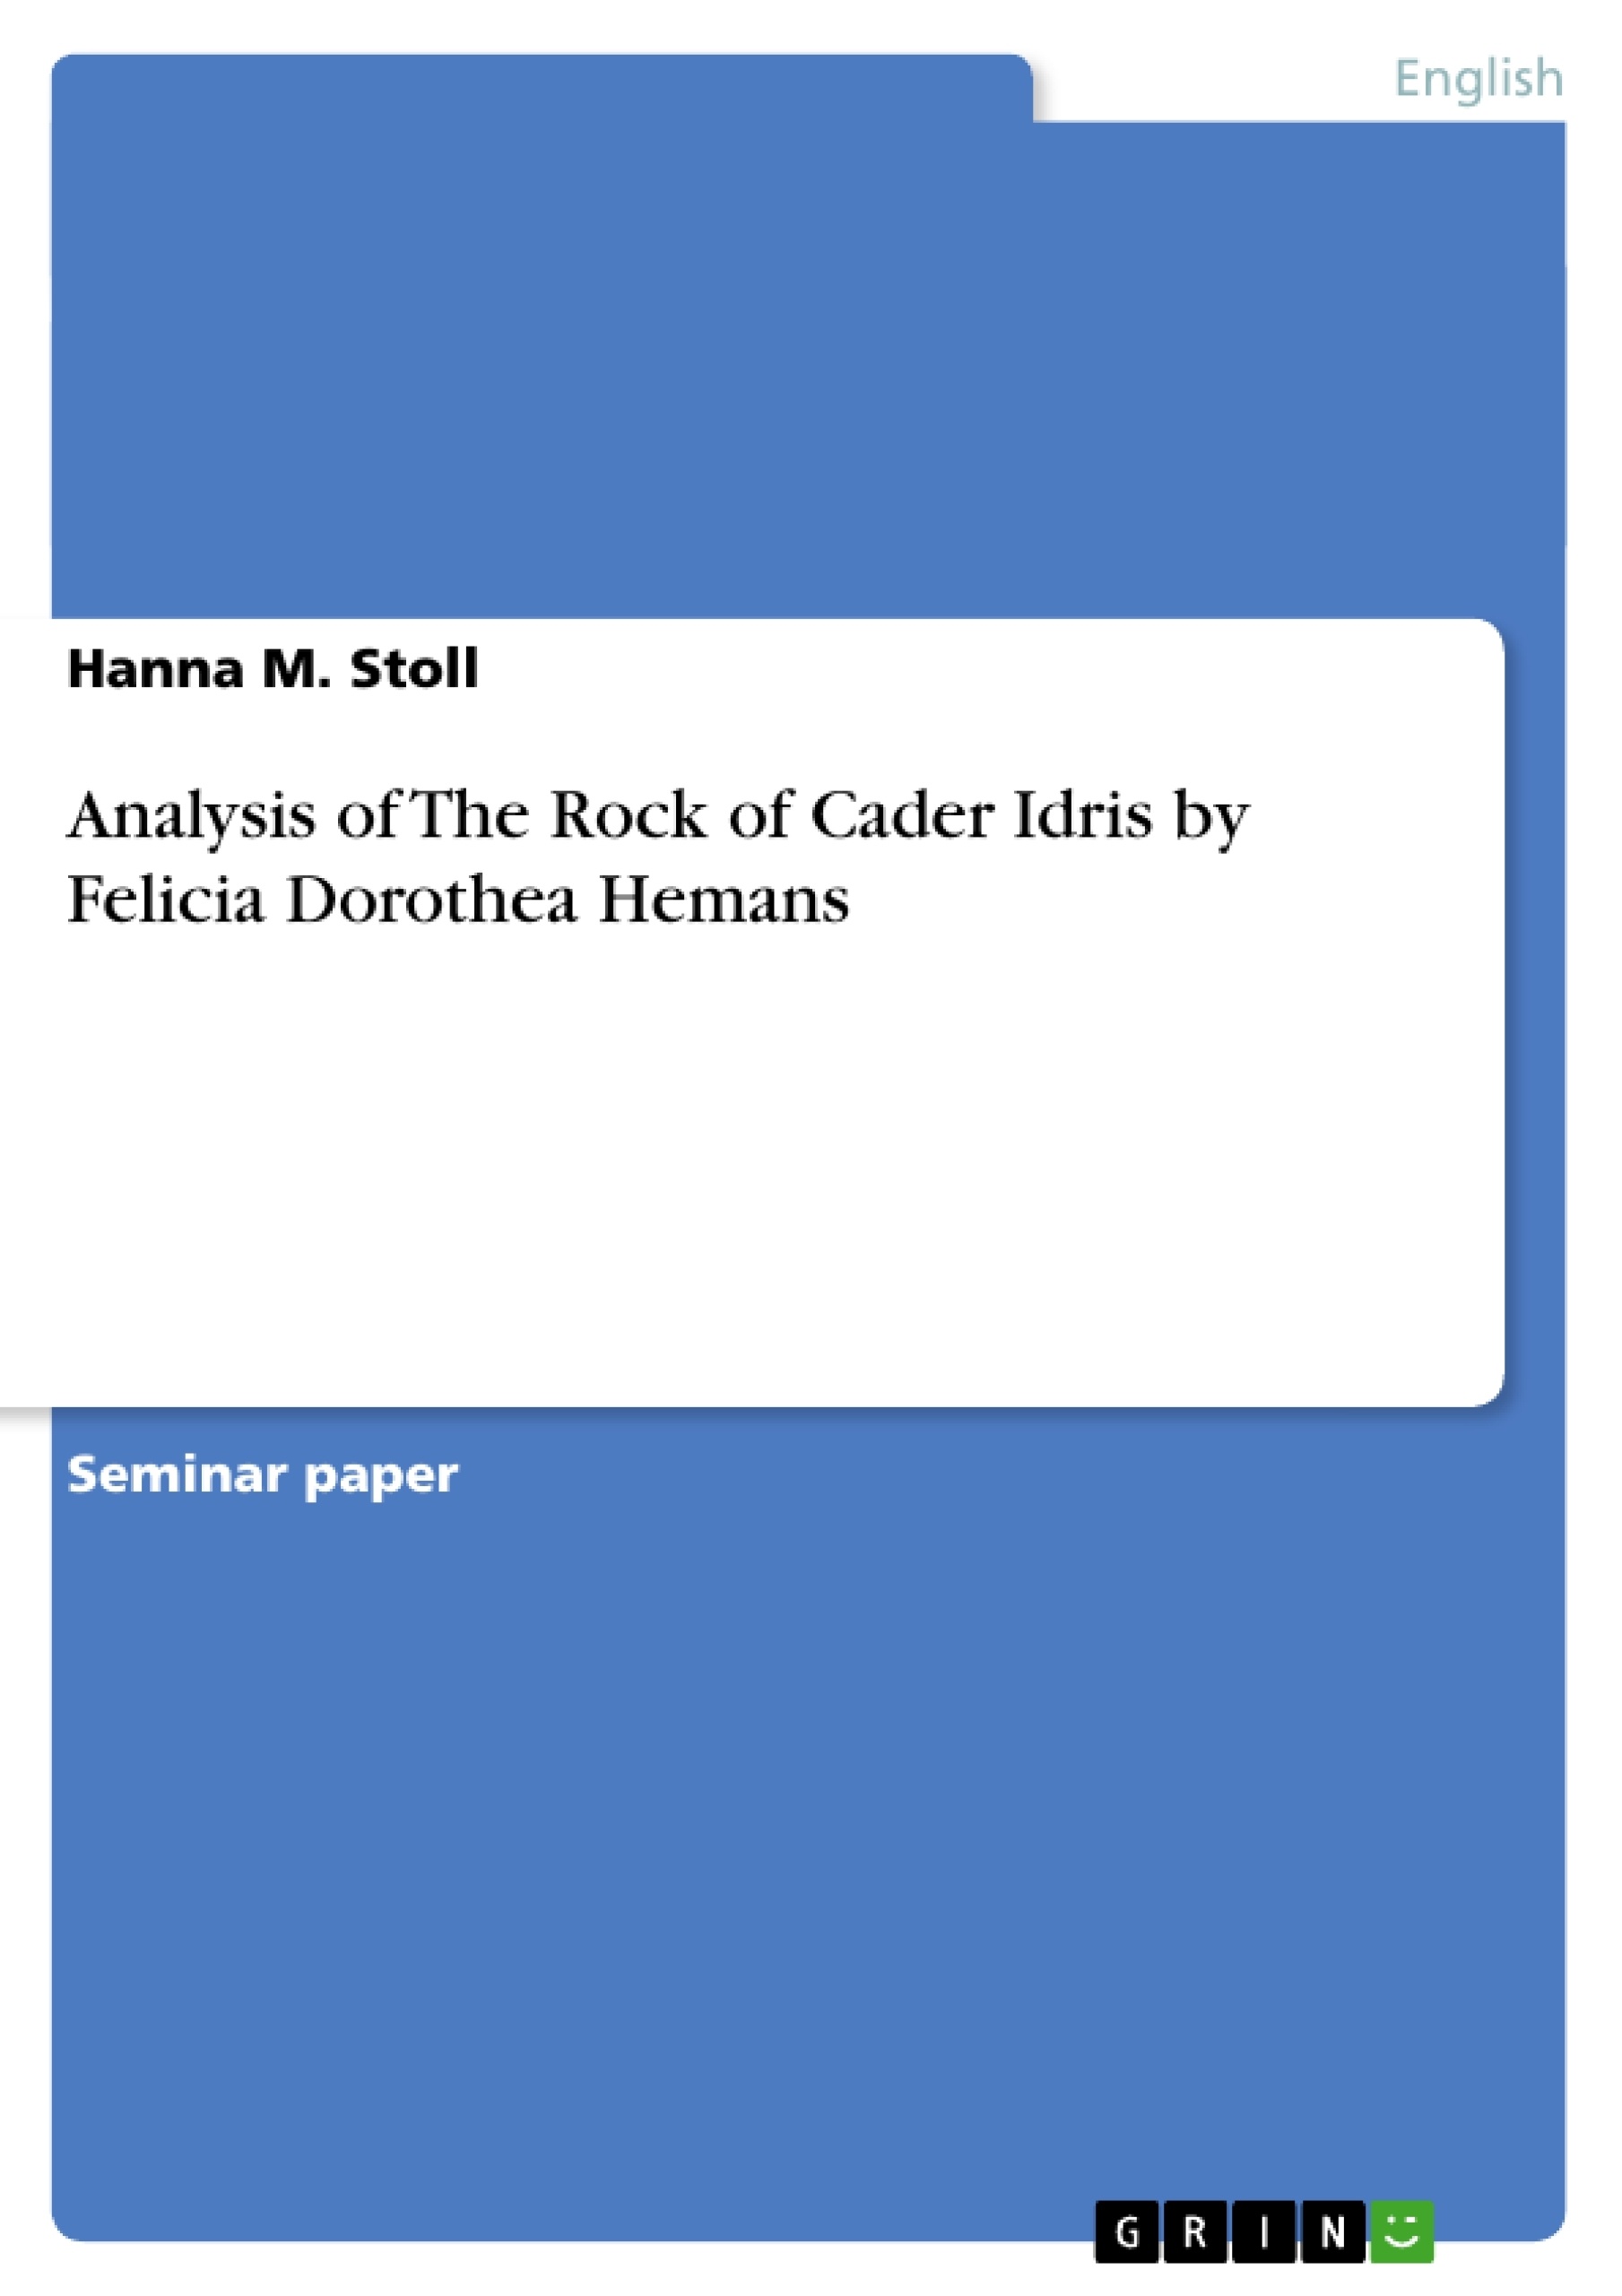 Title: Analysis of The Rock of Cader Idris by Felicia Dorothea Hemans